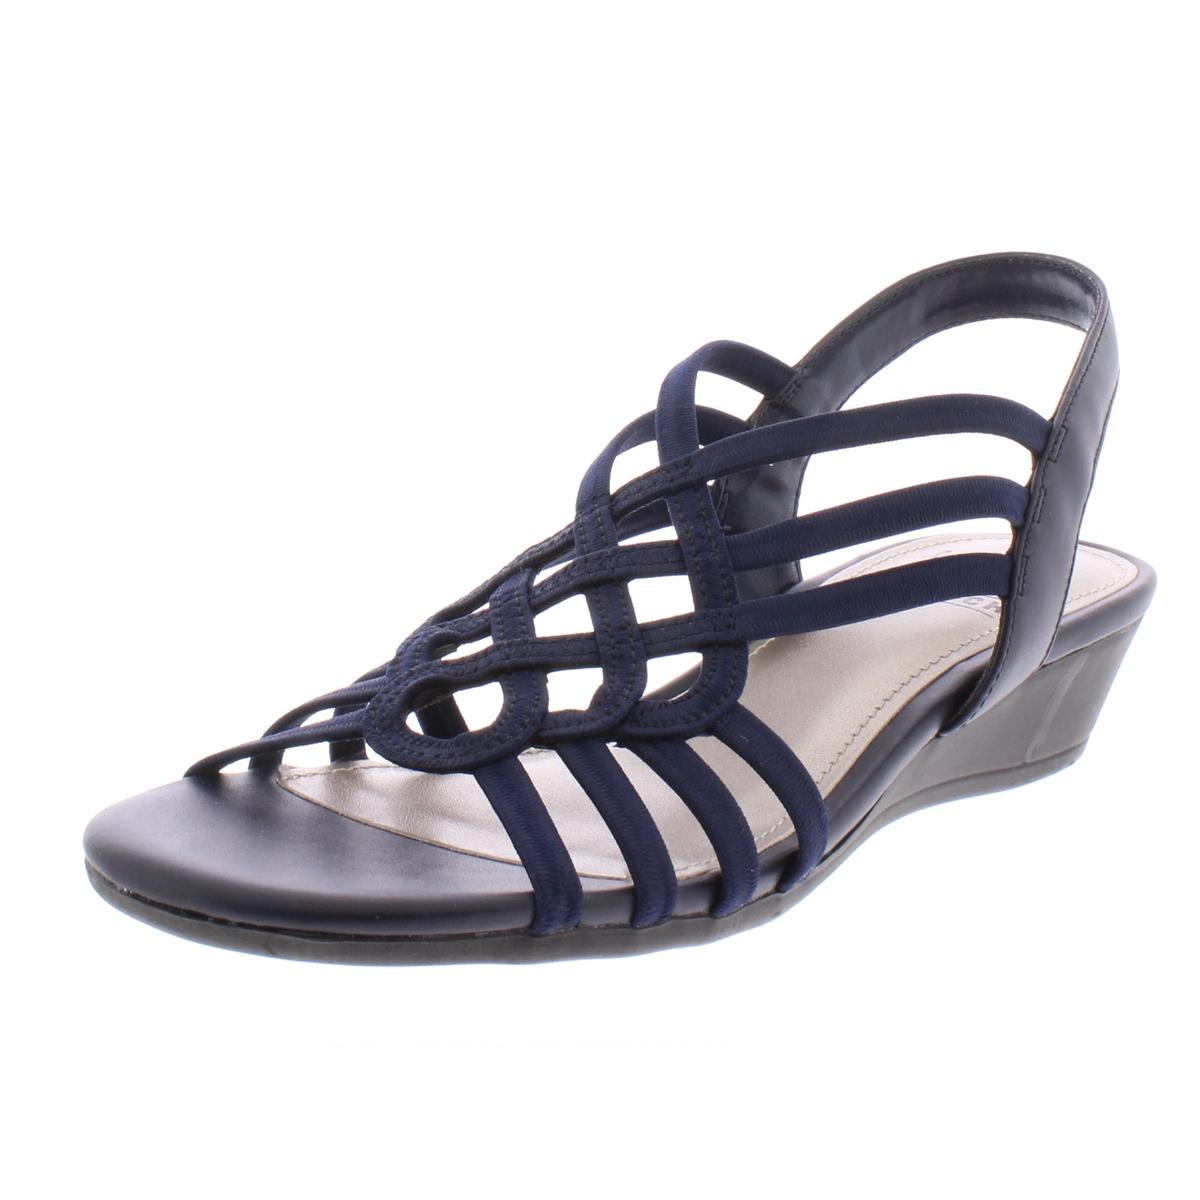 Impo Womens Roma Faux Leather Strappy Dress Wedge Sandals Shoes BHFO ...